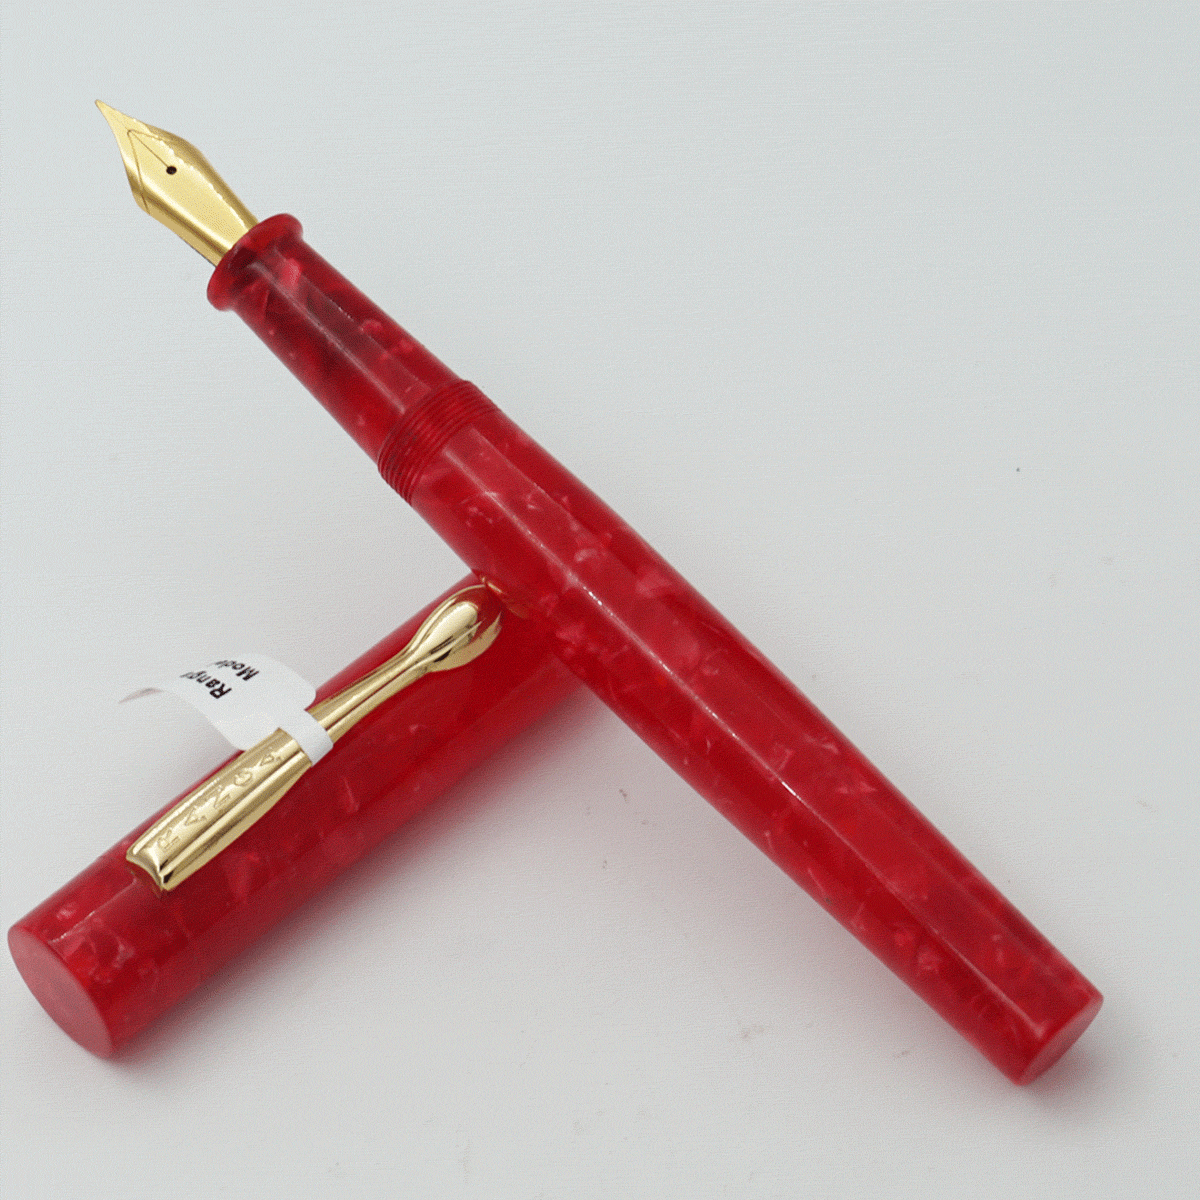 Ranga Handmade Model 3 Premium Acrylic P11 Red on Red Cracked Ice Color Body With Golden Clip German Jowo Nib Converter Type Fountain Pen (Nib Can be Customized With Fine or Medium or Broad) SKU 24247